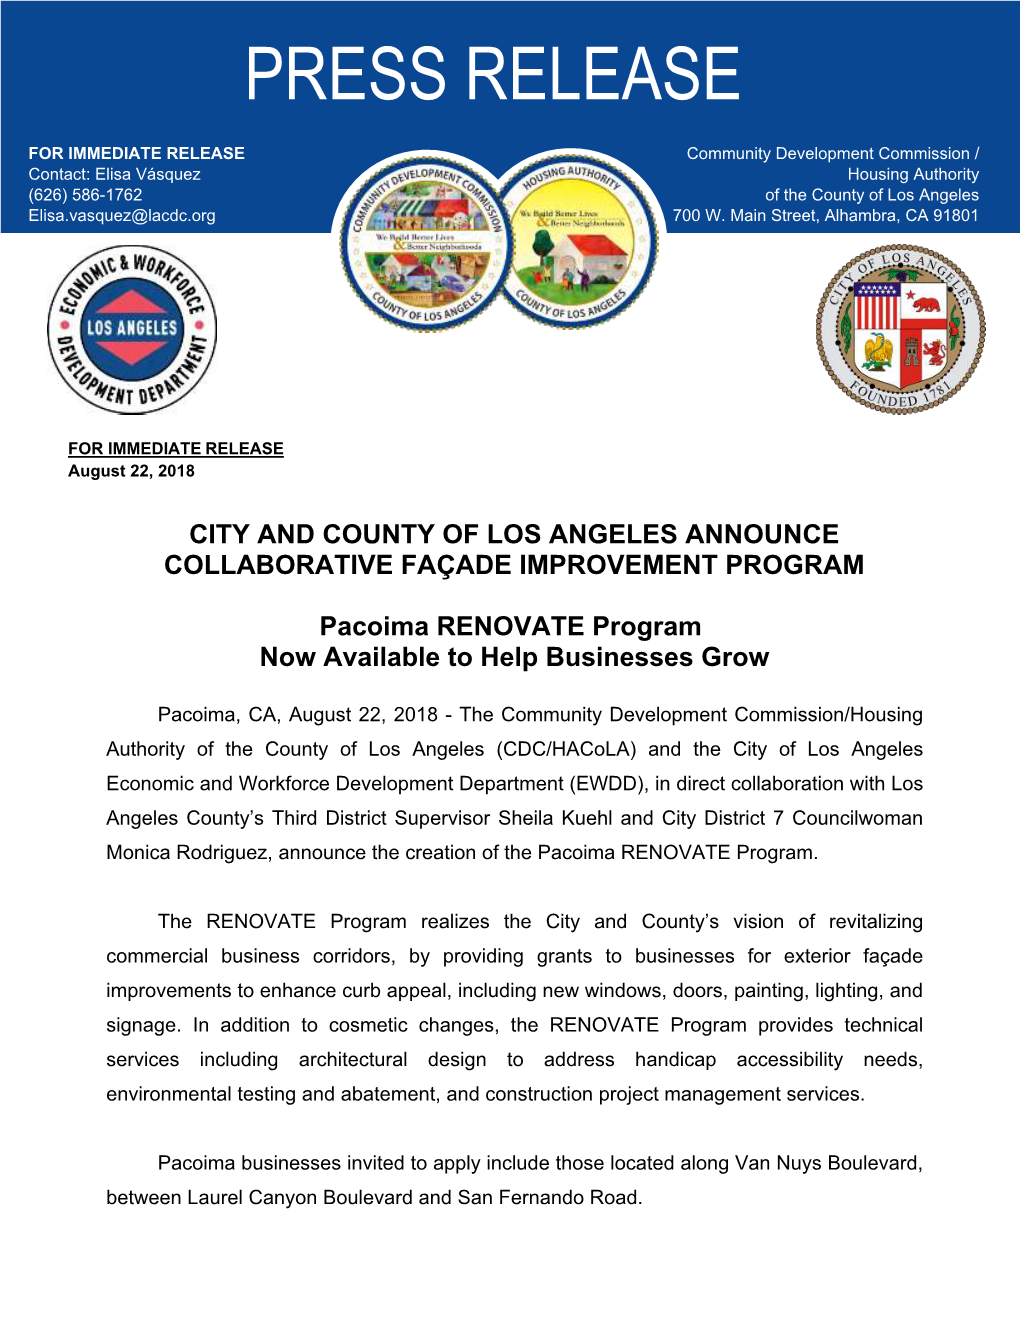 City and County of Los Angeles Announce Collaborative Façade Improvement Program